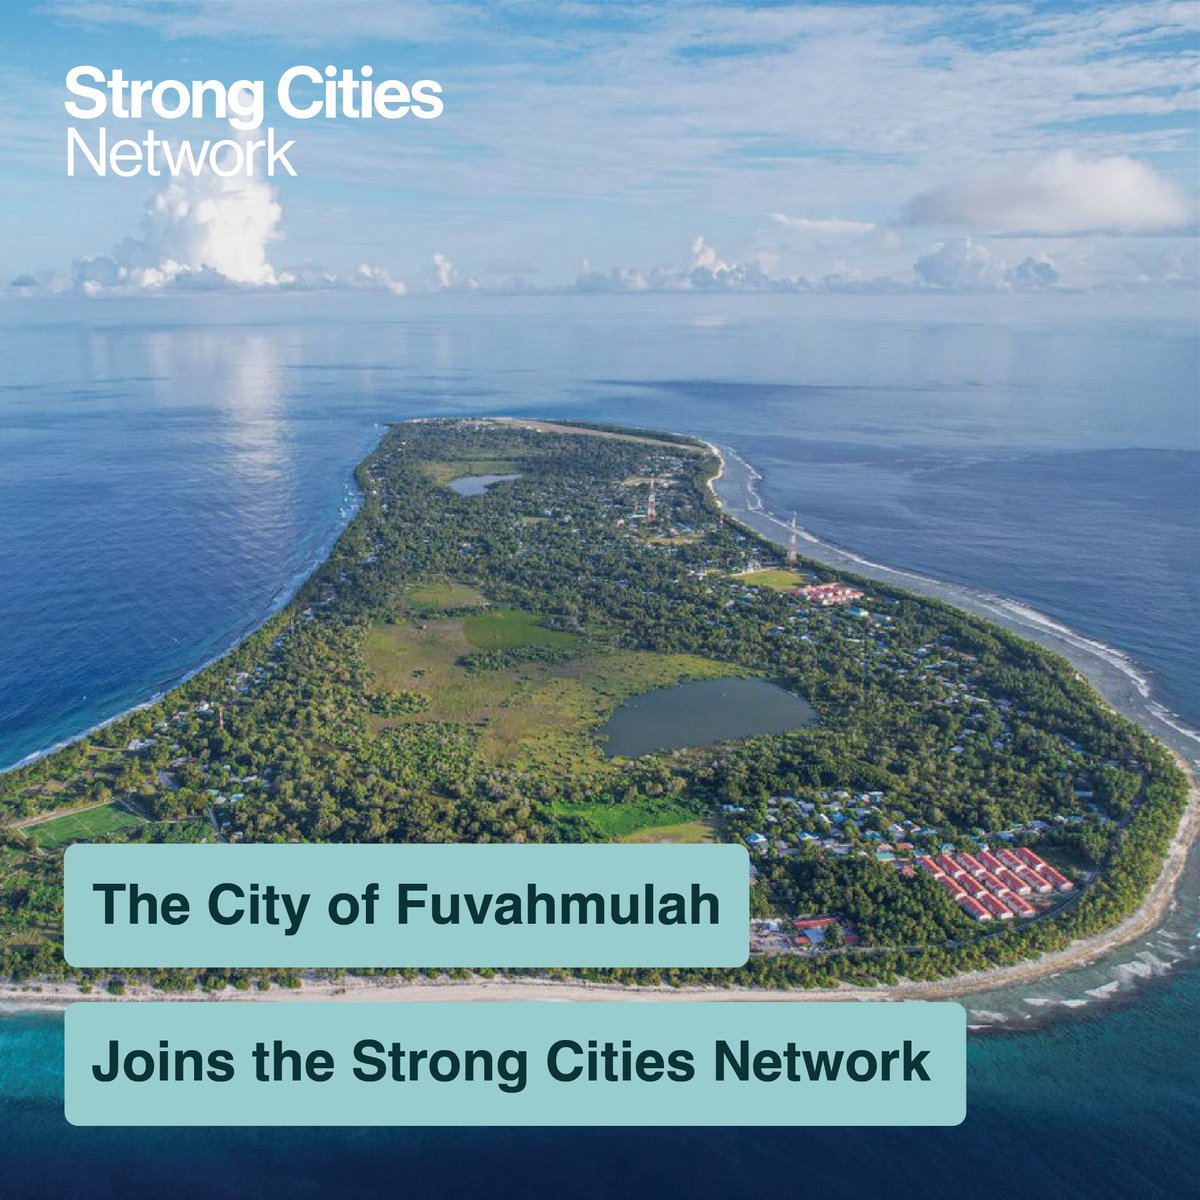 We are delighted to welcome the City of Fuvahmulah 🇲🇻 to the Strong Cities Network! @FVMCouncil joins a network of 195+ cities committed to addressing hate, extremism & polarisation. 1/2